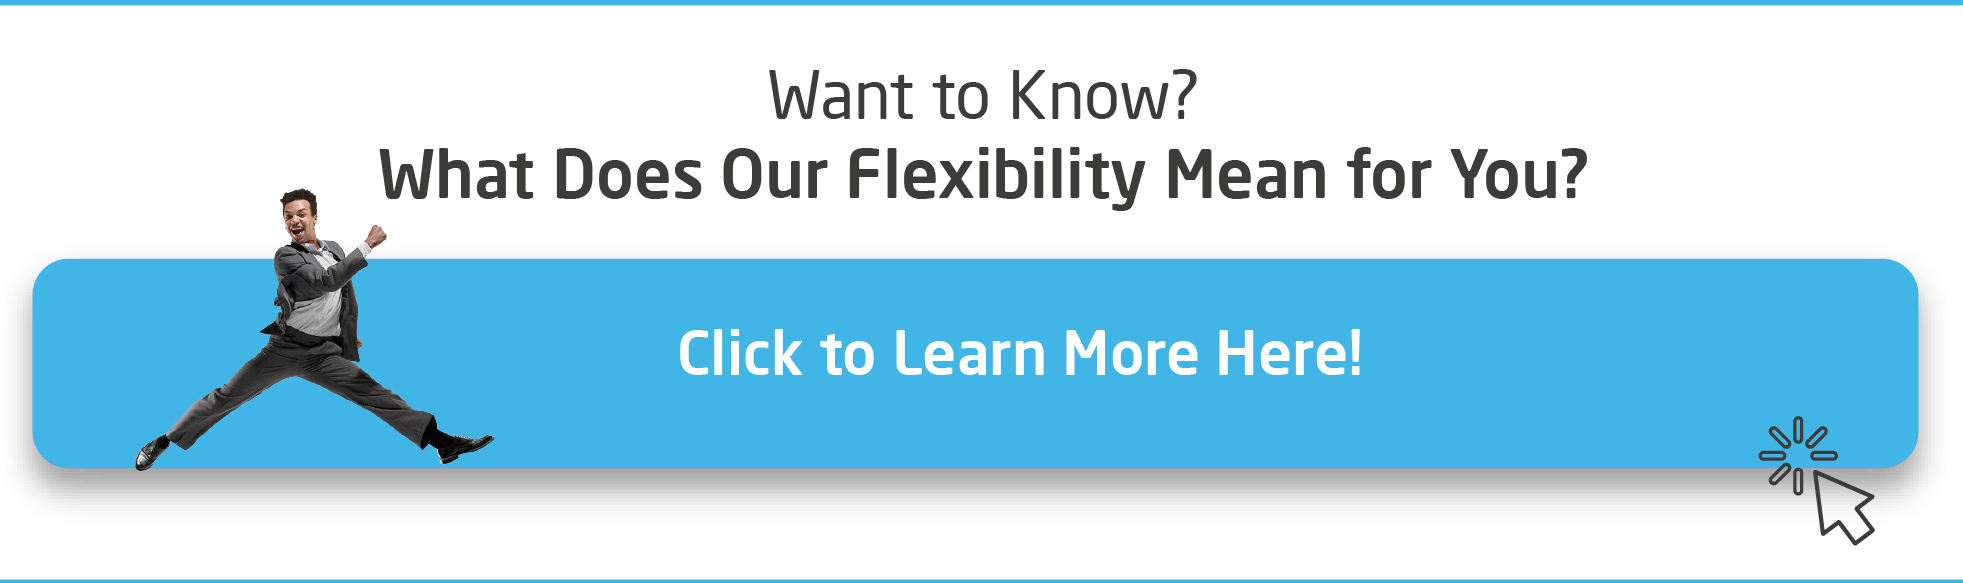 CTA-What-Does-Our-Flexibility-Mean-For-You